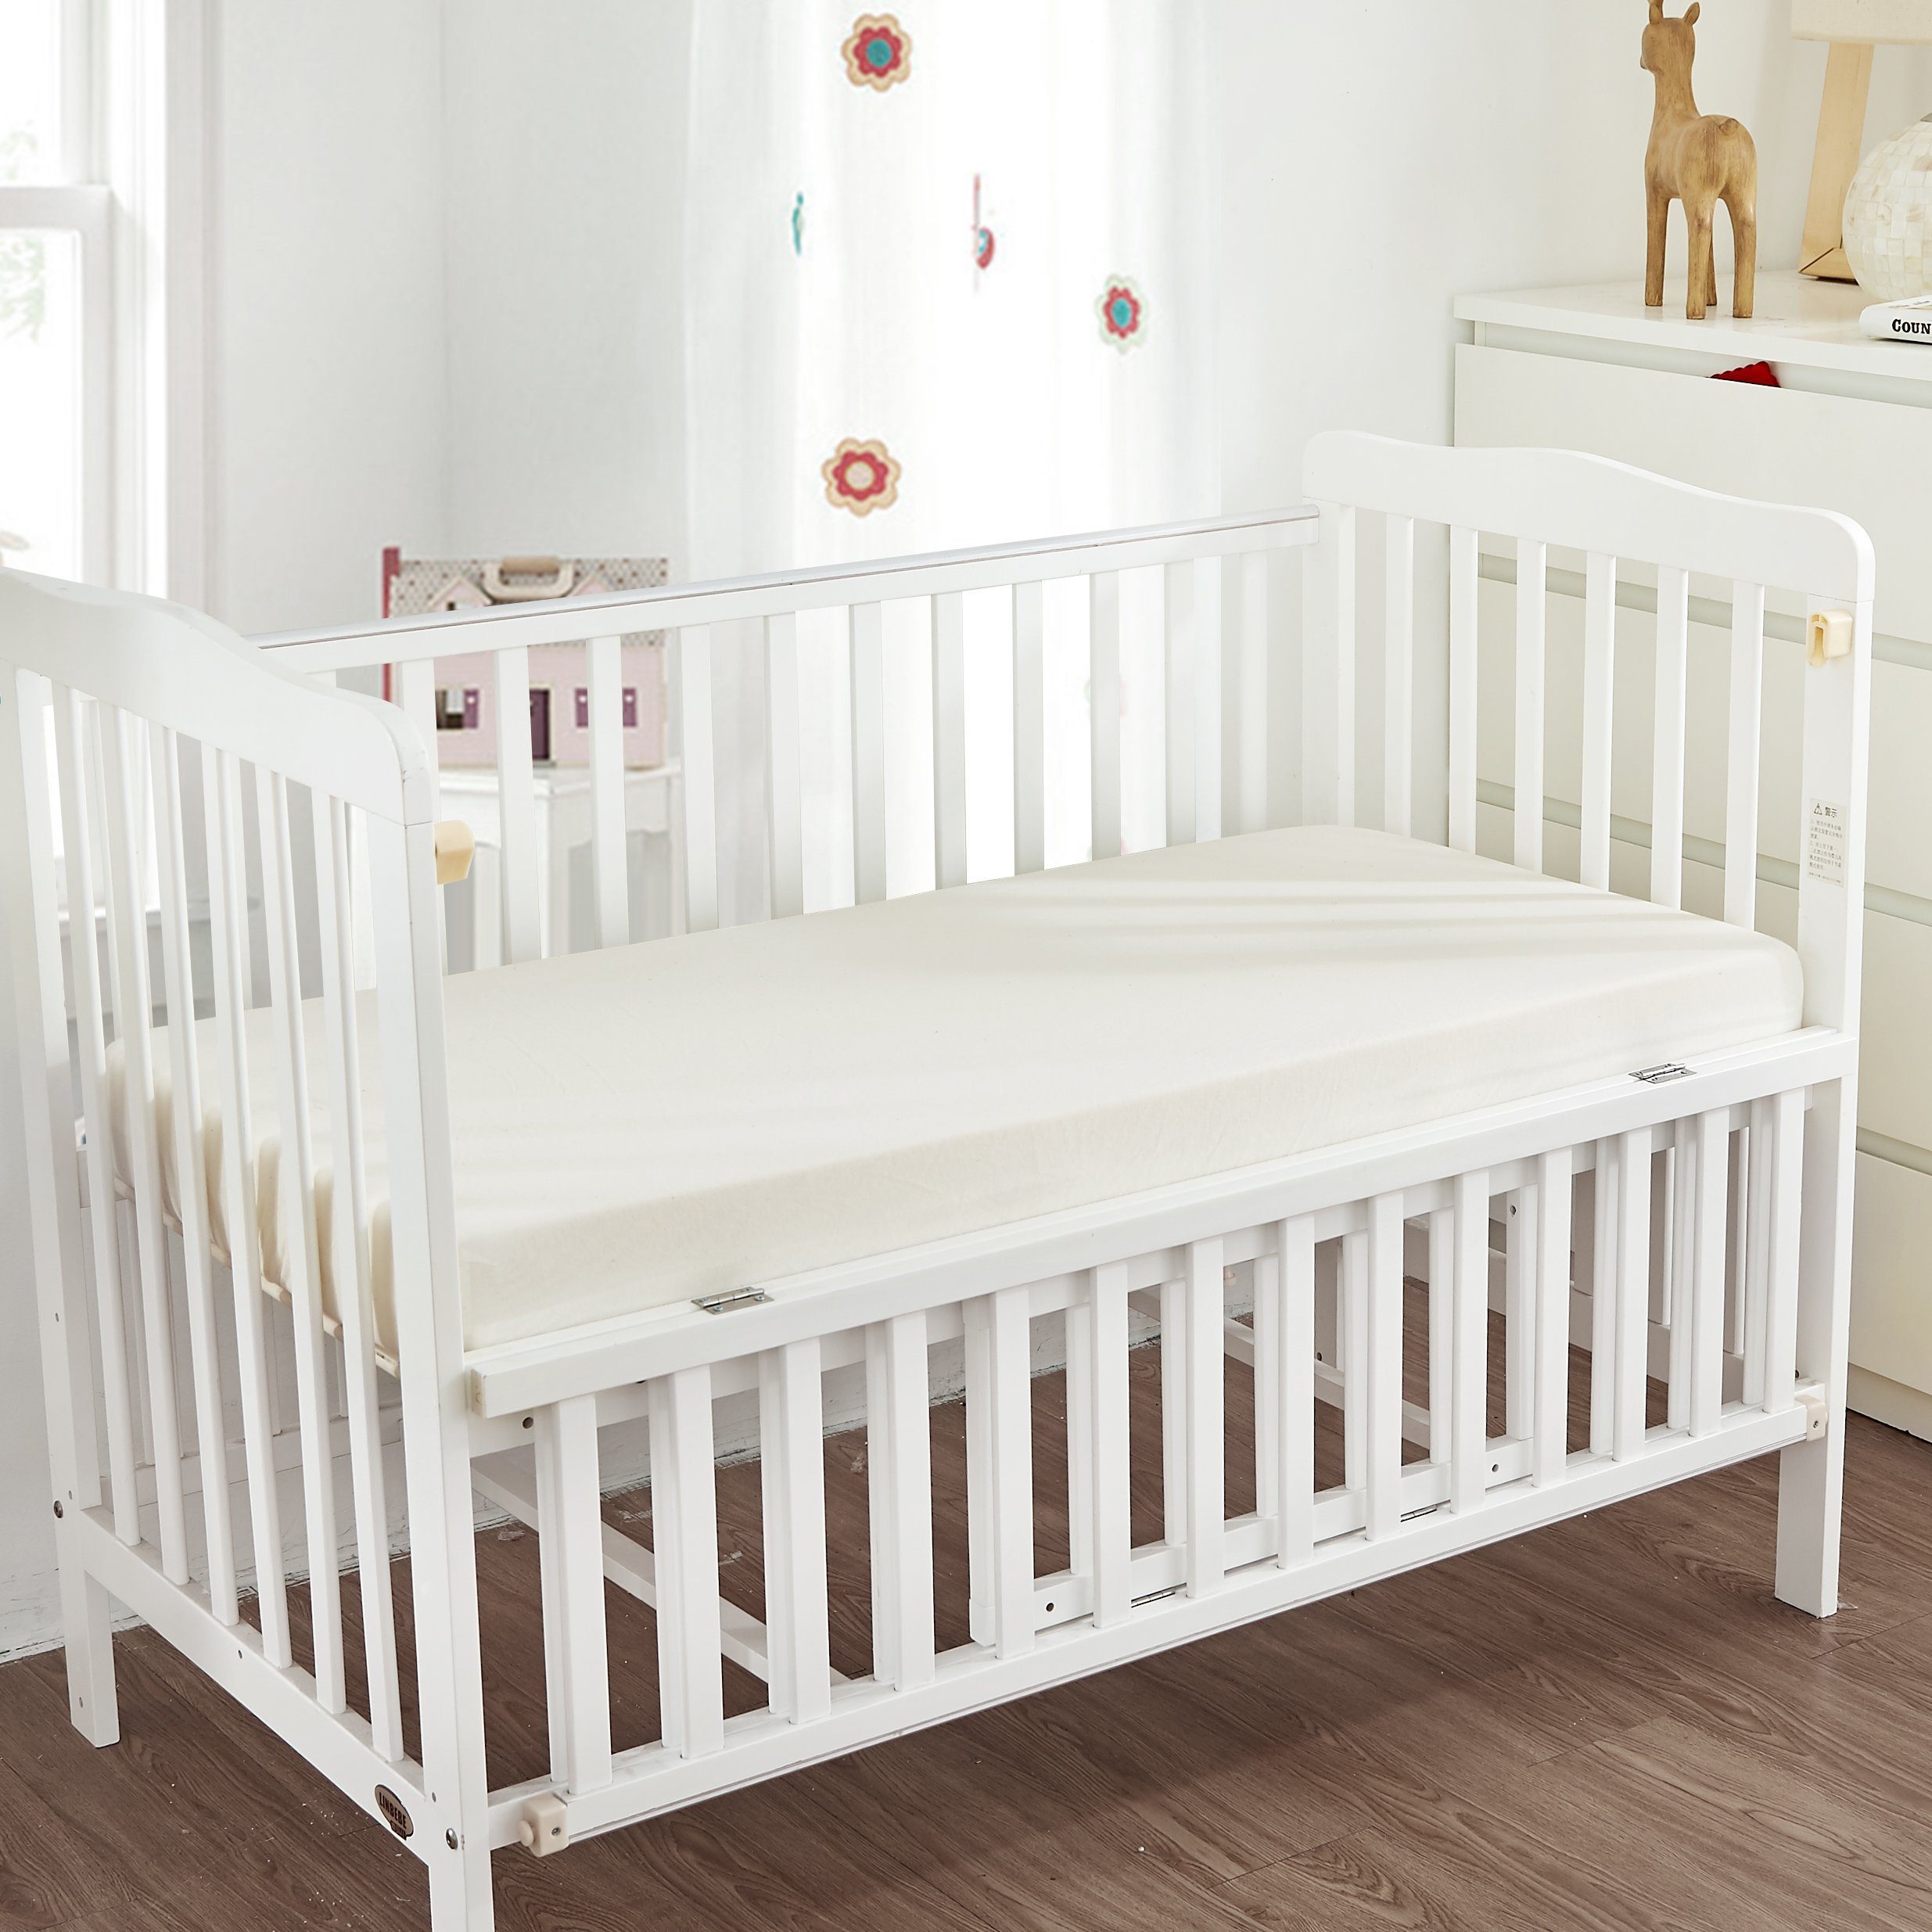 Natural Cotton Fitted Safety® Crib Sheets Crib Sheet Bargoose Home Textiles, Inc. 27" x 54" x 7" 